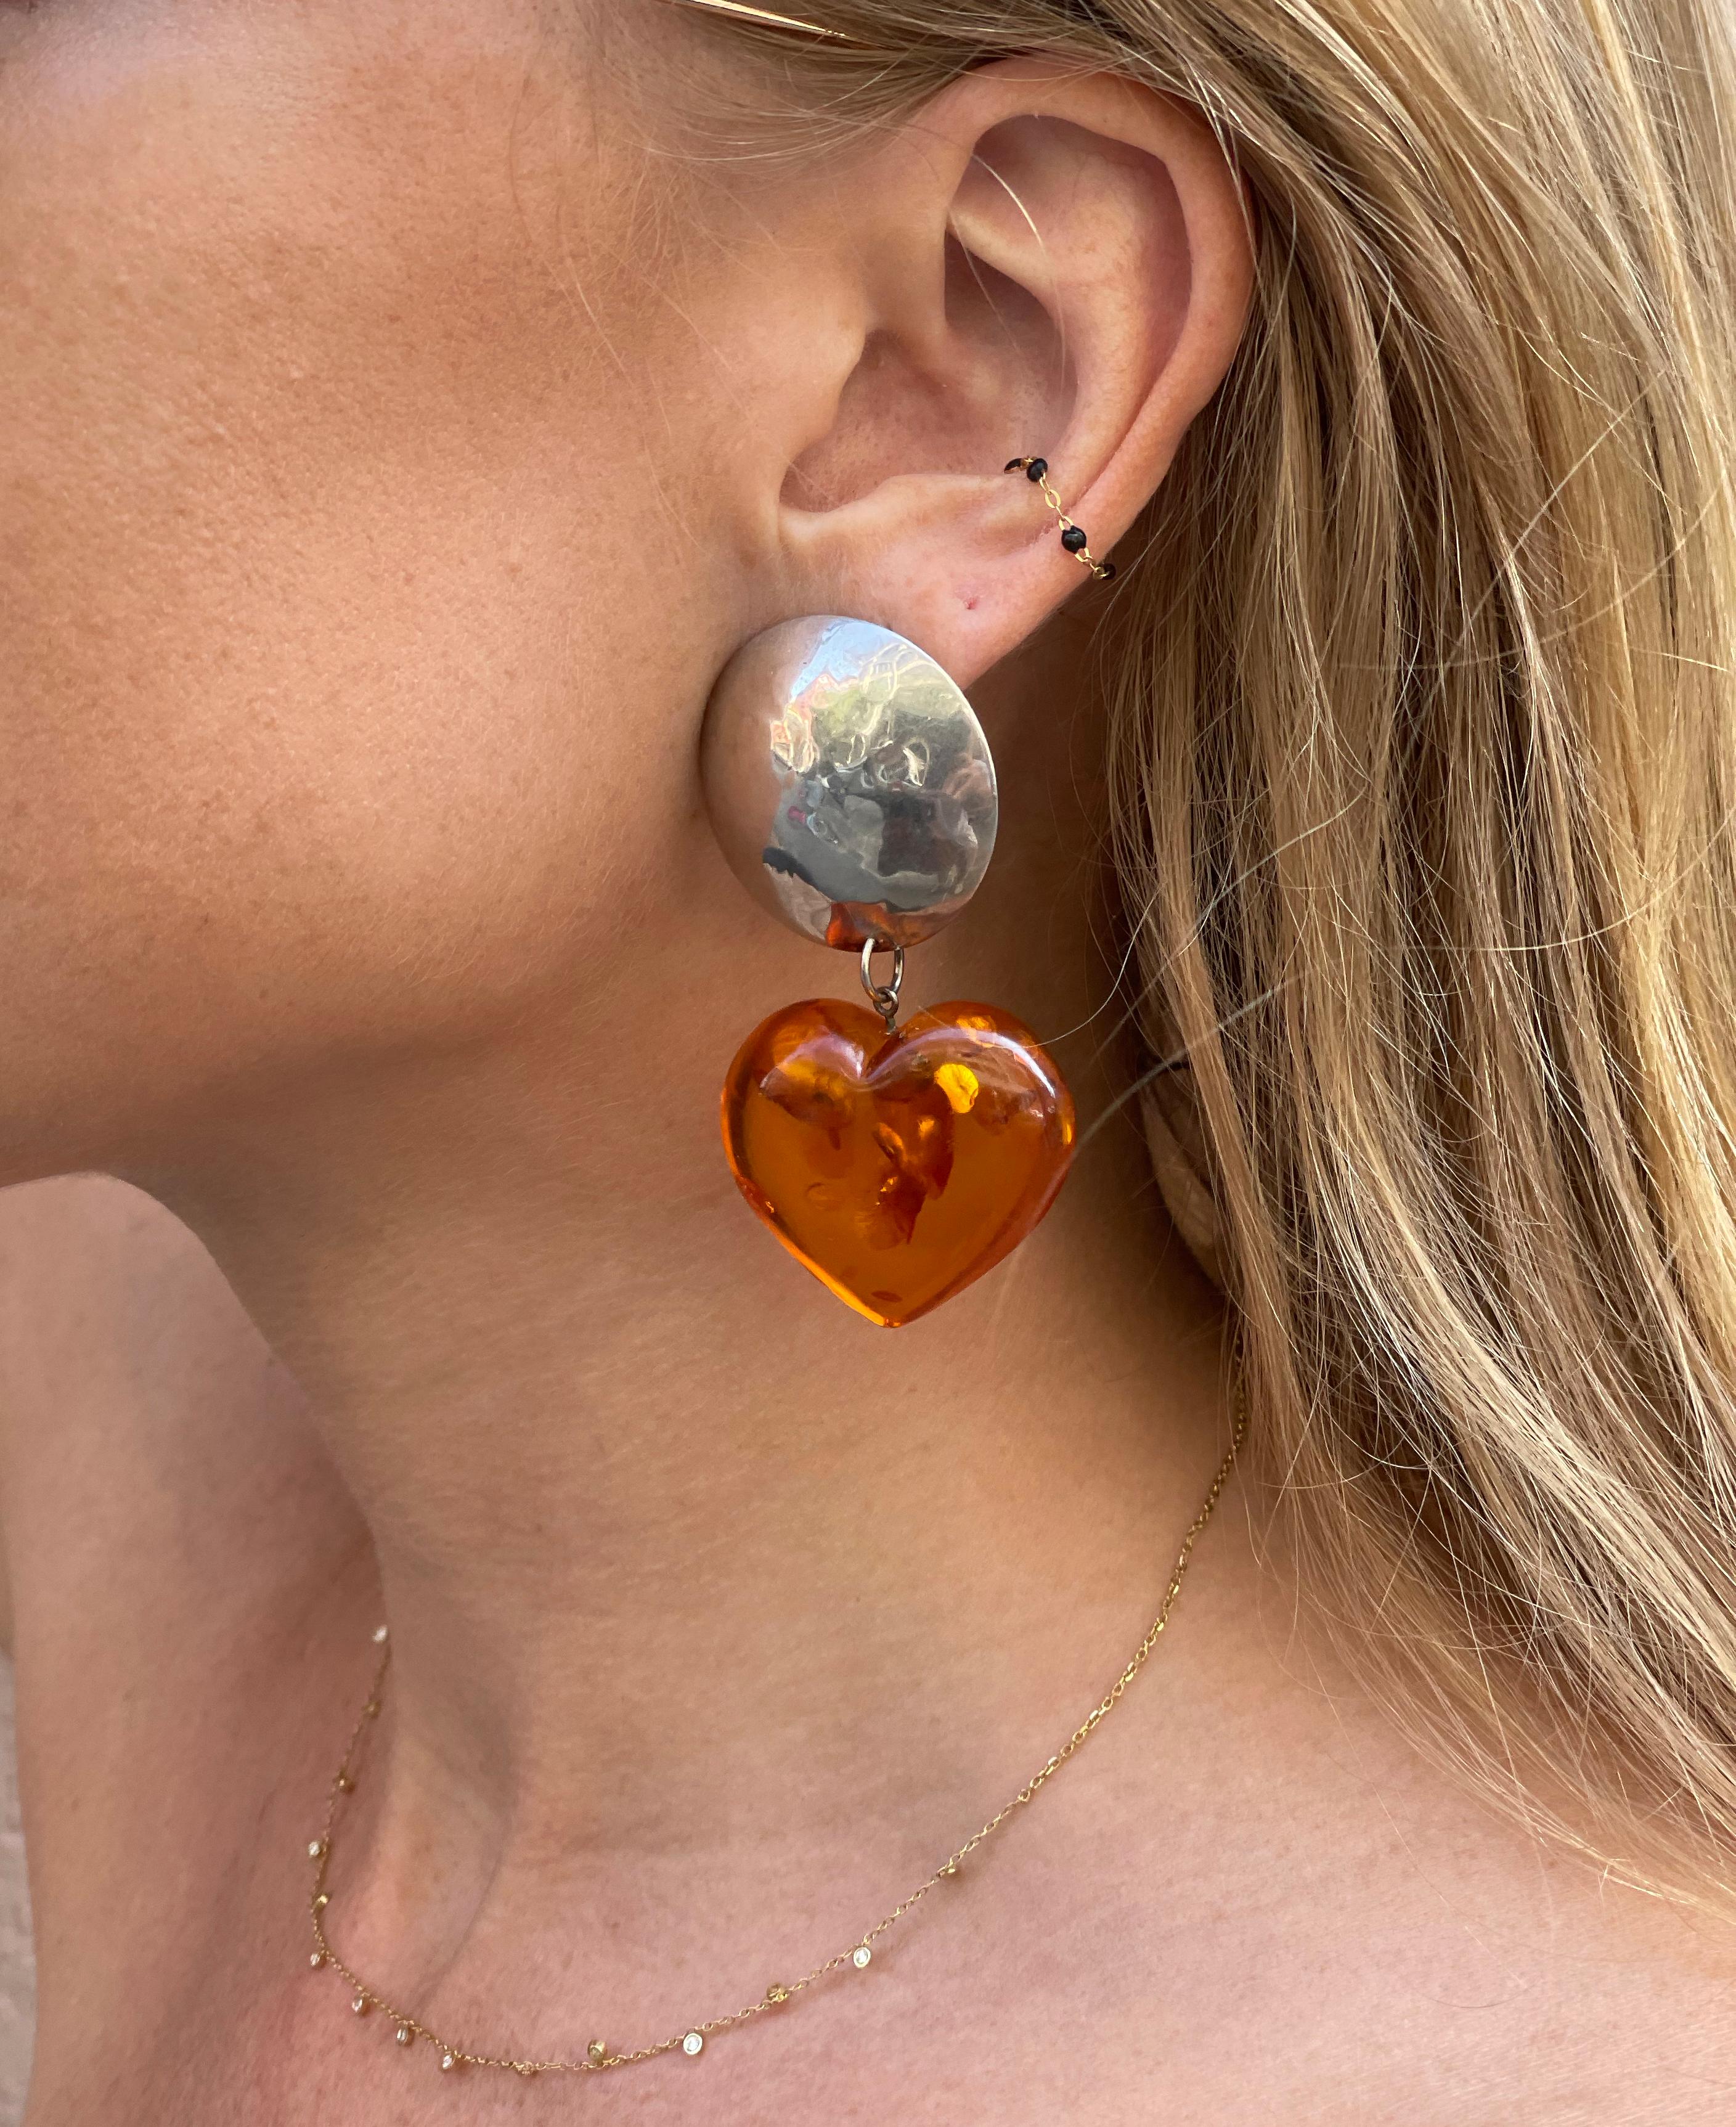 SIGNED VINTAGE BALTIC AMBER HEART EARRINGS: These earrings stopped me dead in my tracks: they are so special that I immediately wanted to know their story (and wear them with everything). They are made of sterling silver and a large heart-shape